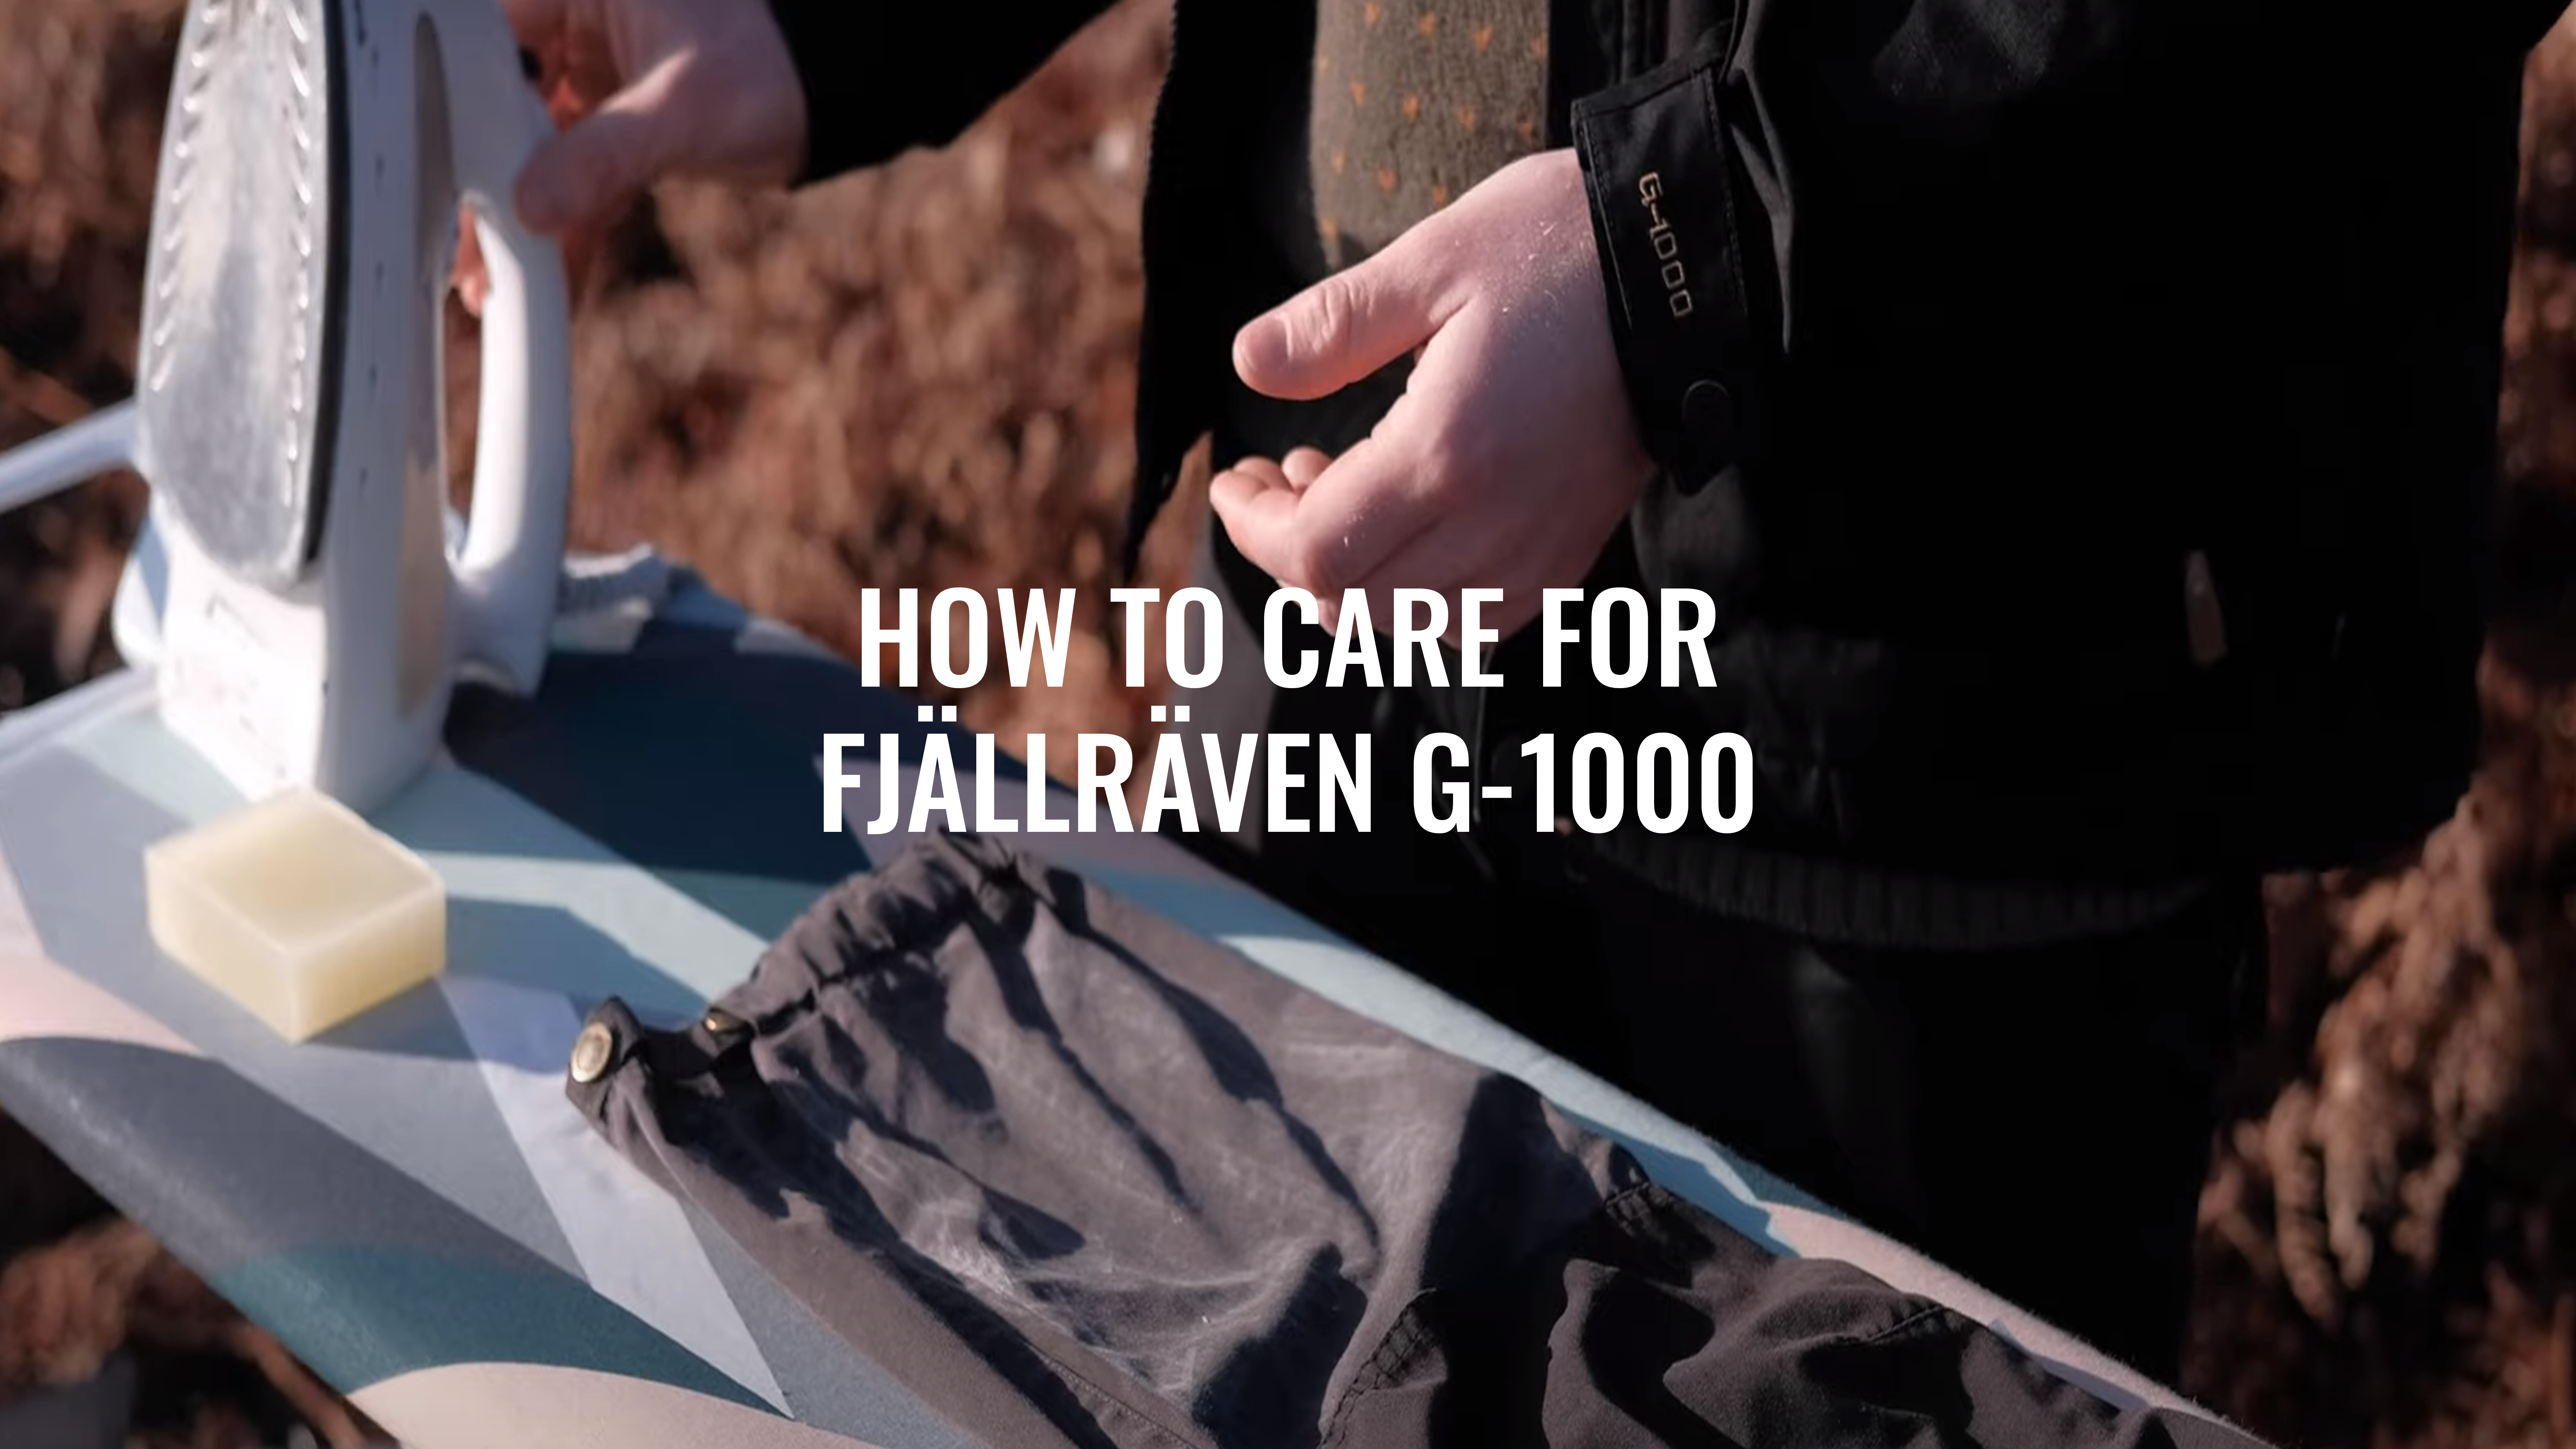 How to care for Fjallraven G-1000